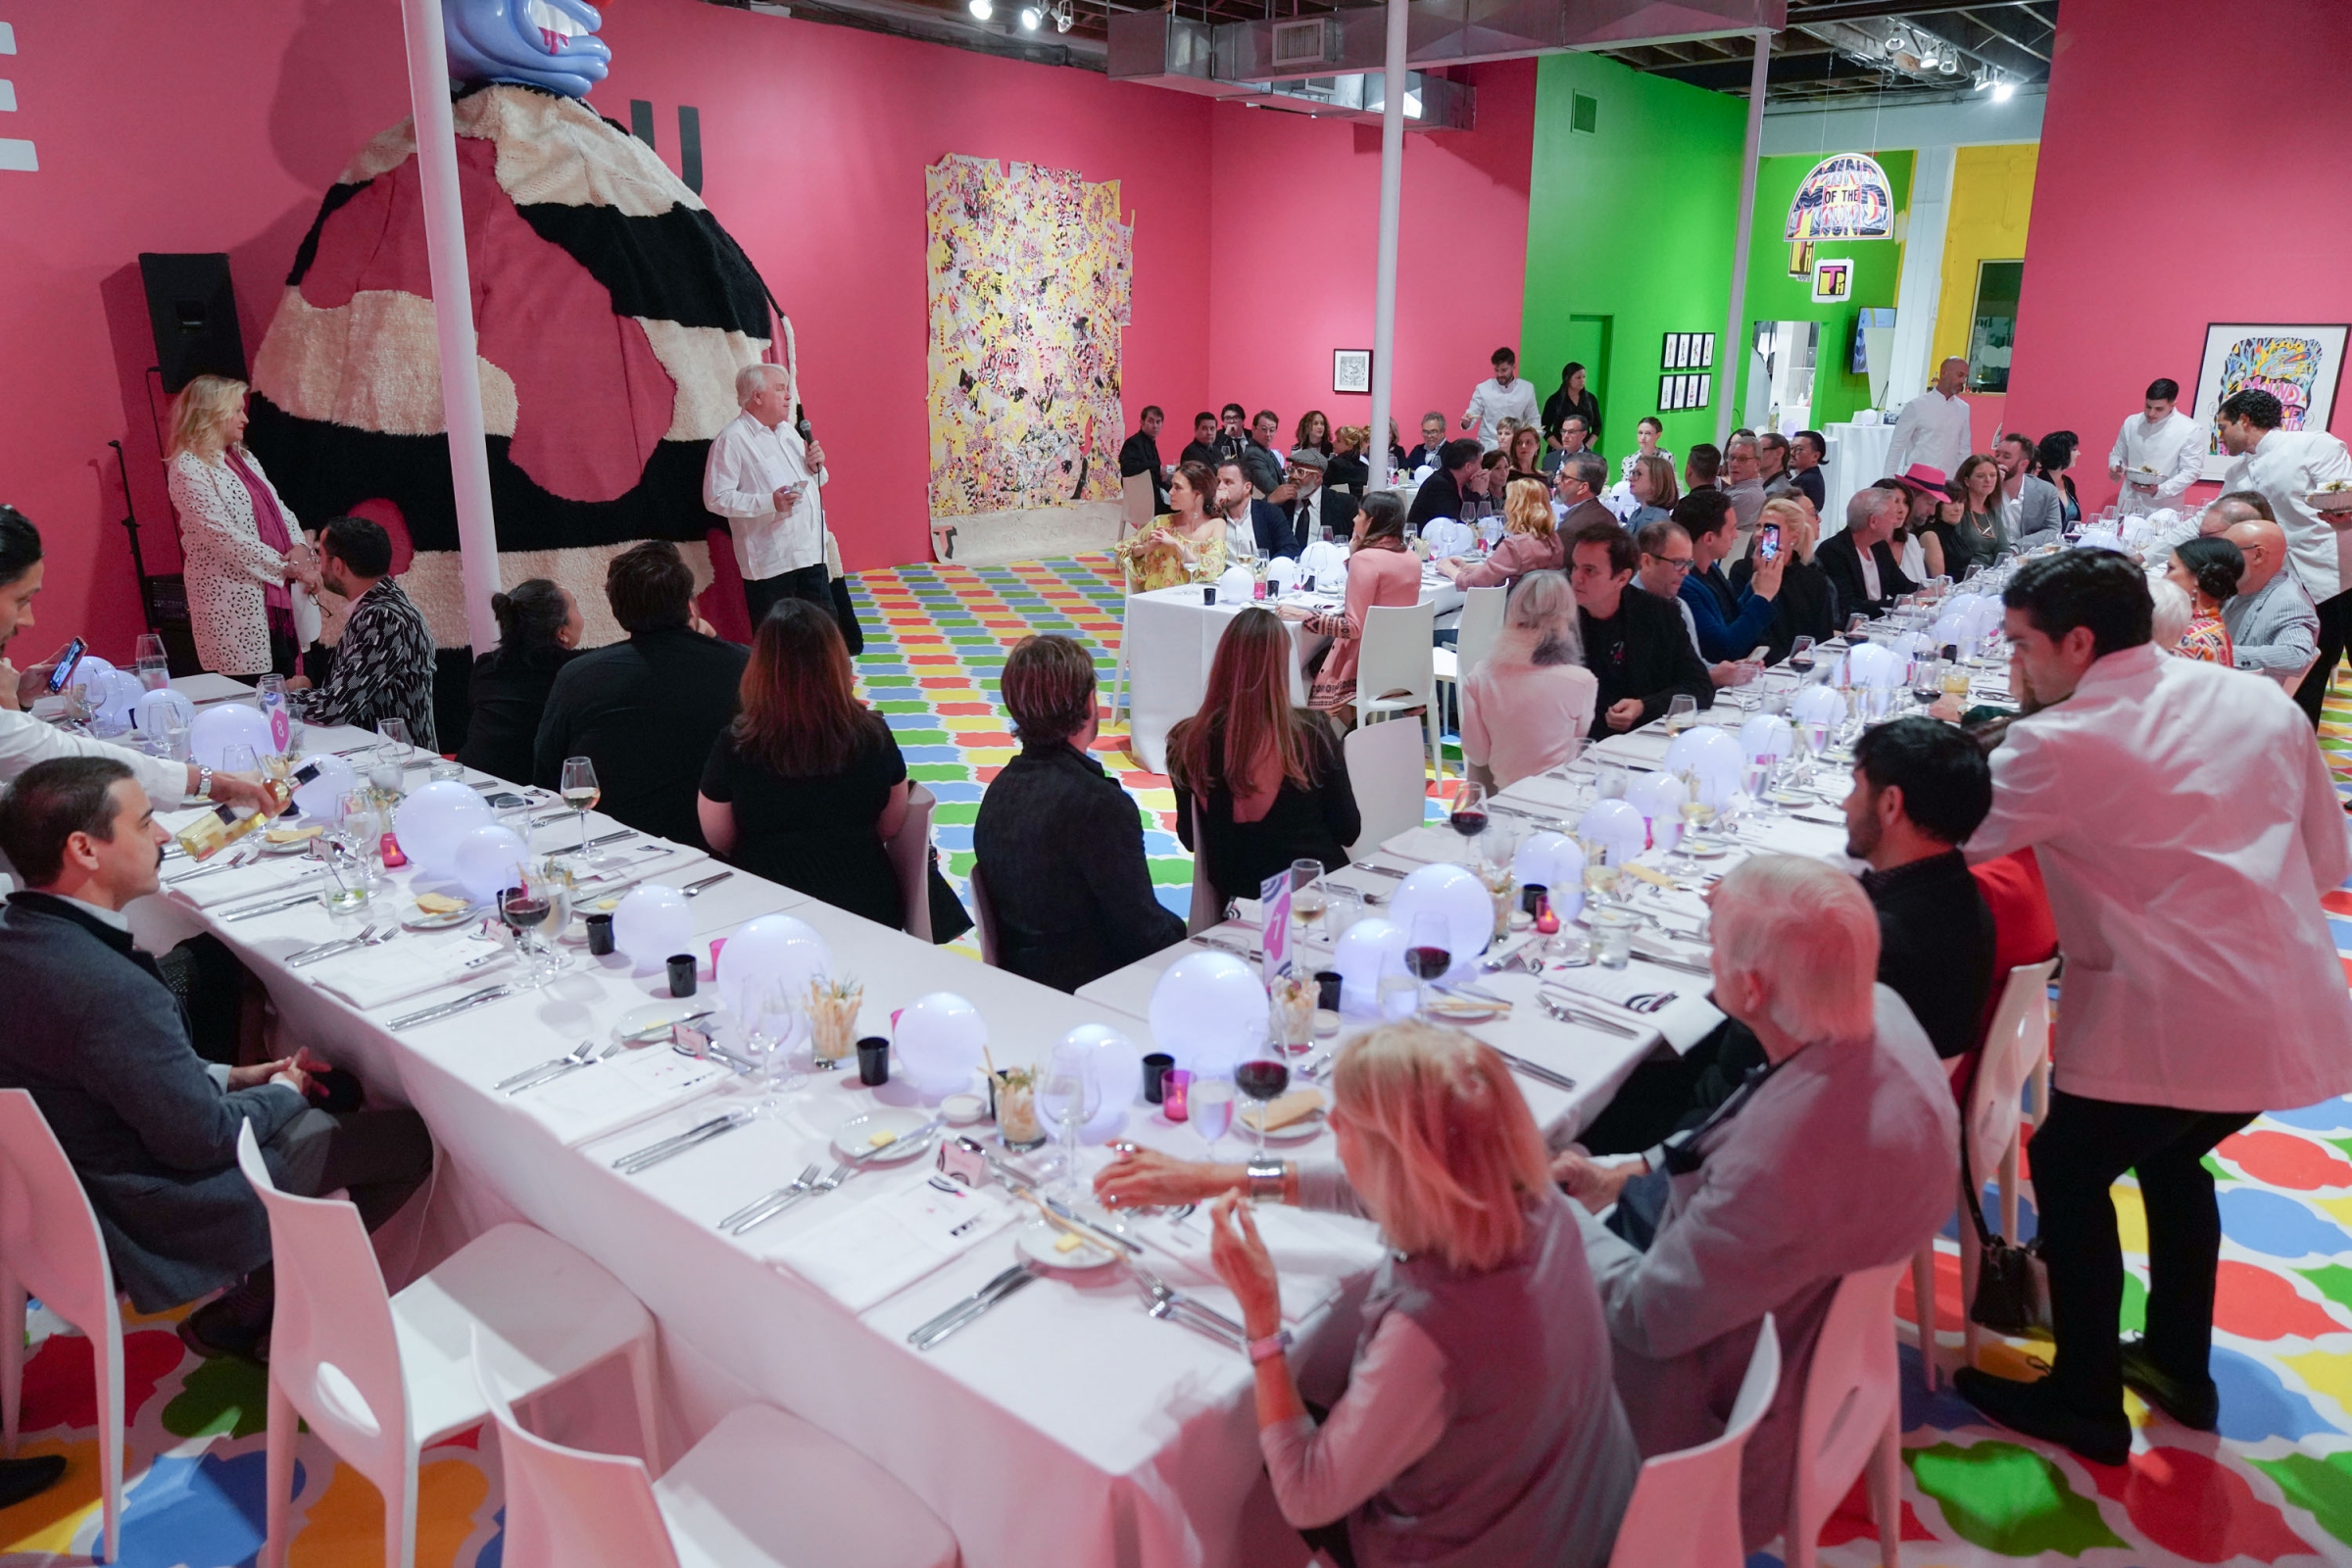 2019 Annual Benefit Dinner - ARCHIVE